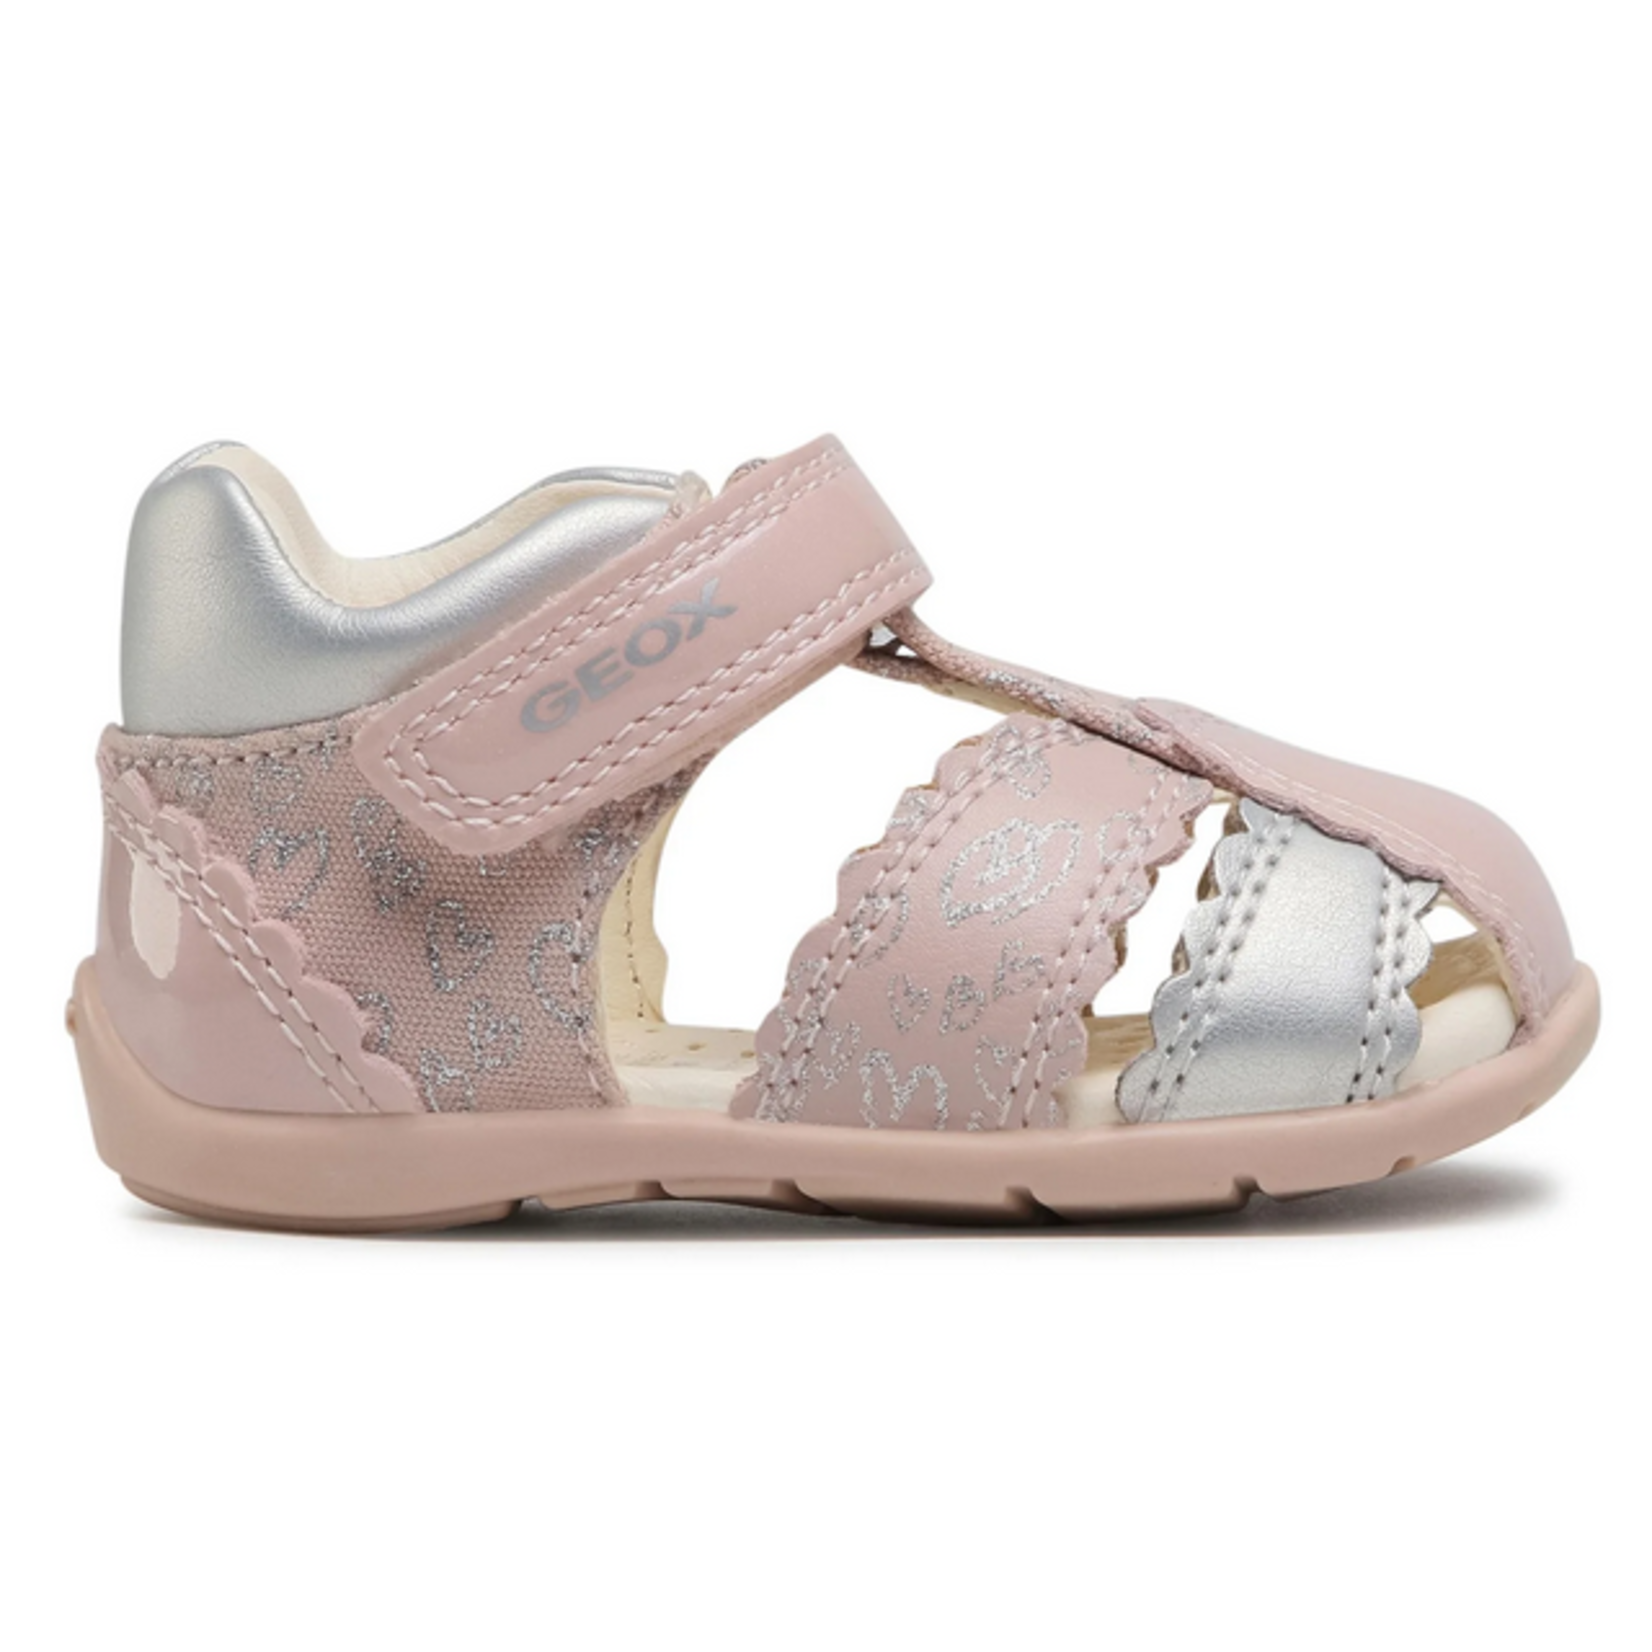 Geox GEOX ELTHAN ROSE/SILVER SANDALS